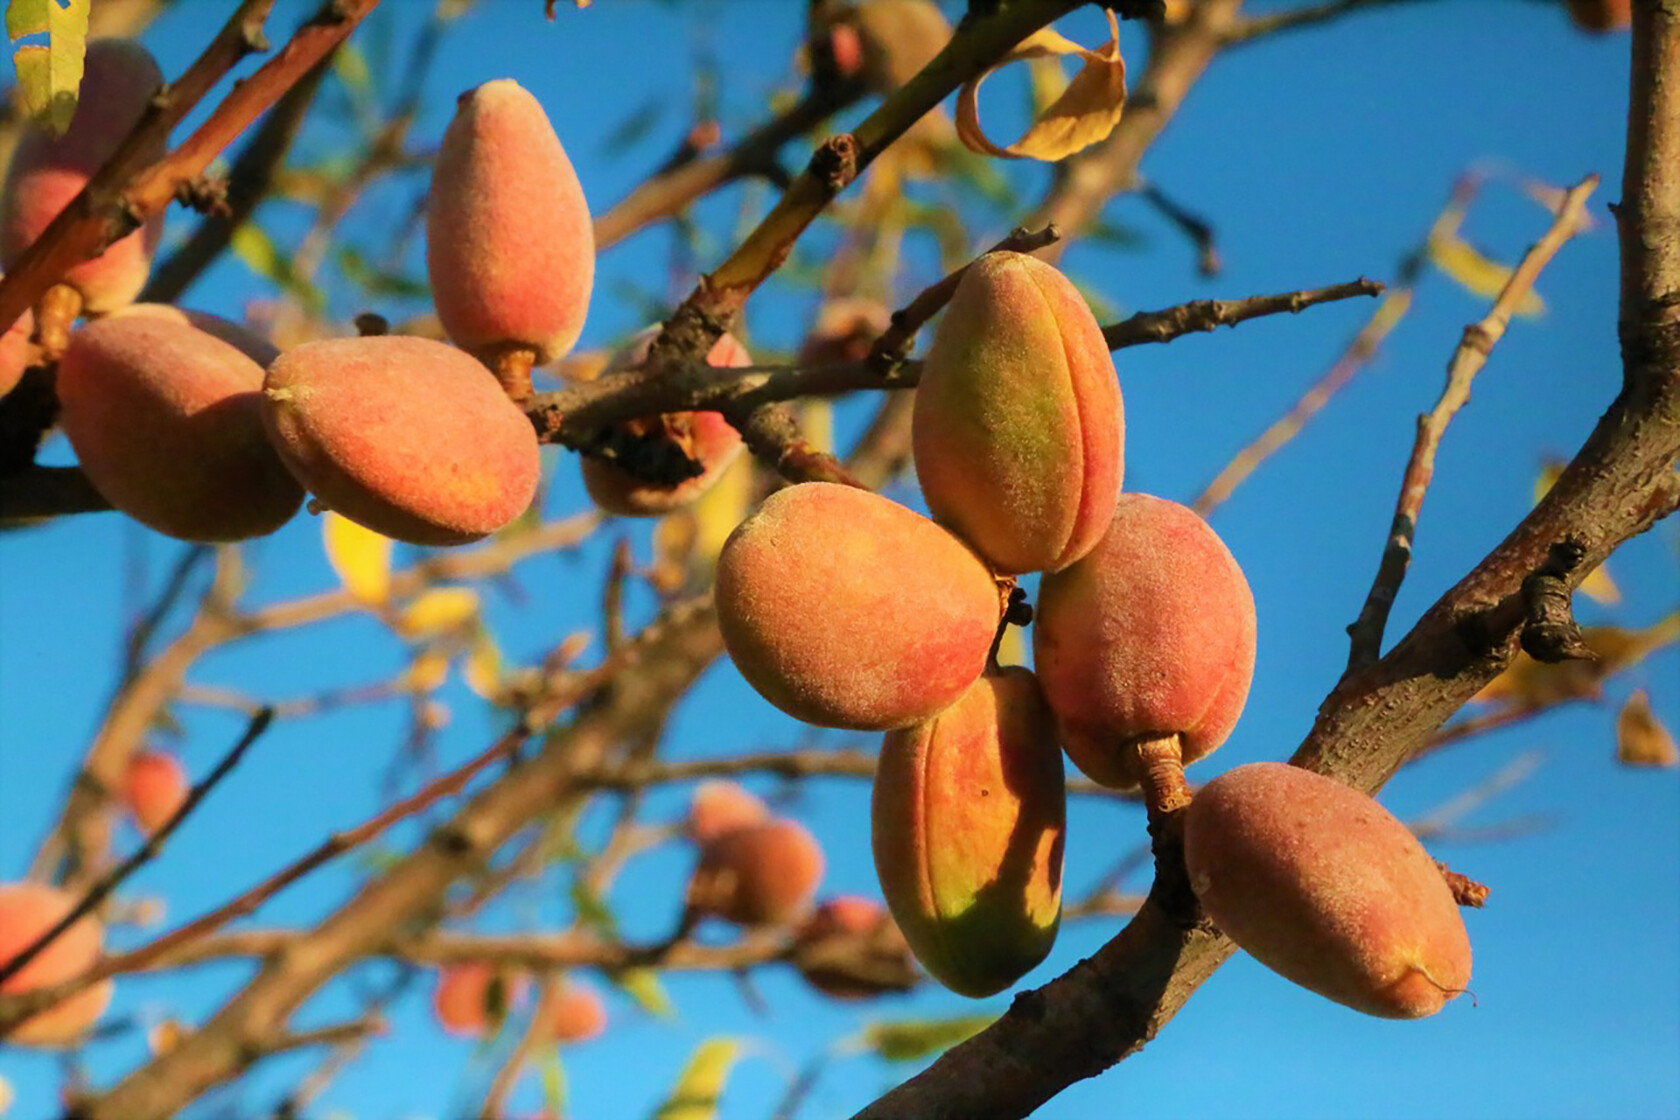 Discovering Provence's Almond Trees